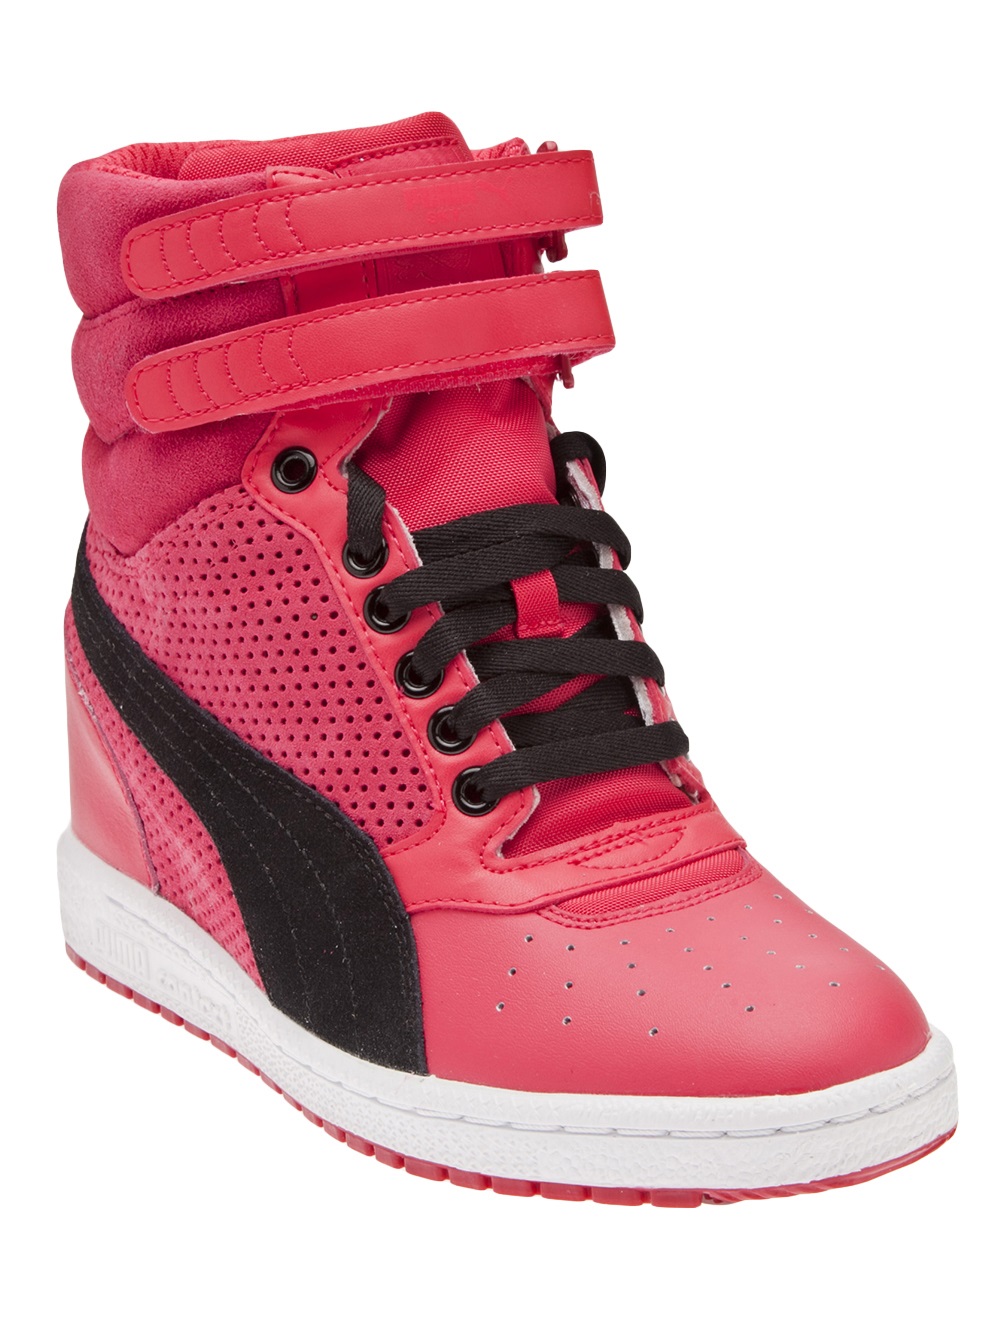 PUMA High Top Wedge in Pink - Lyst